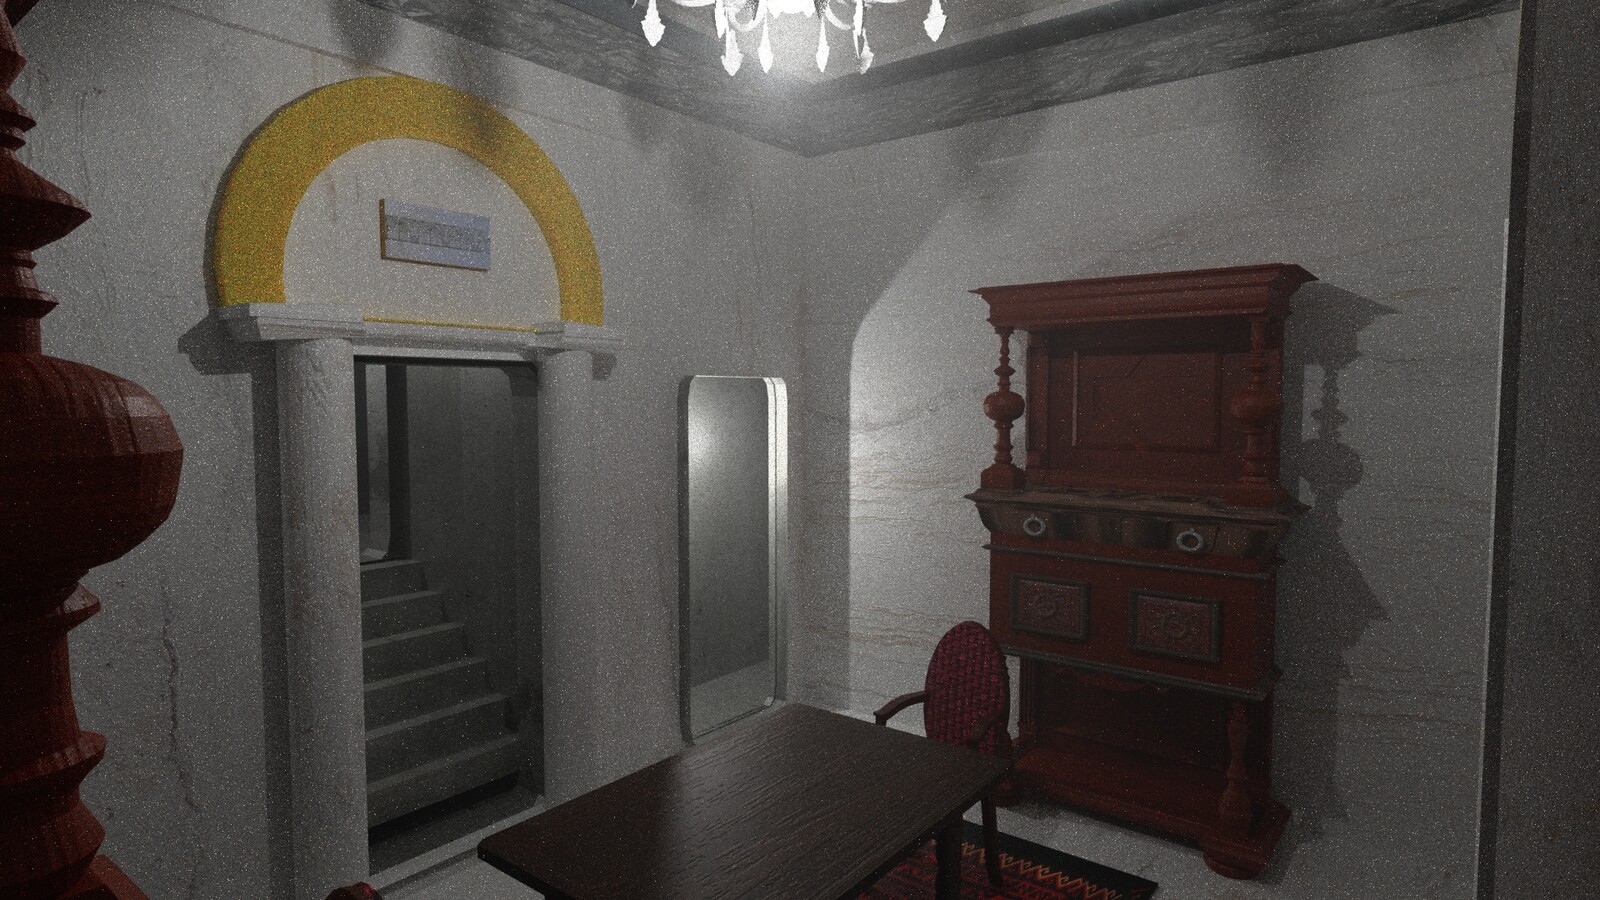 This is the dining room (part 2) of my Nautilus VR project. This is the model in Blender rendered in Cycles before being imported into Unreal Engine 4.
